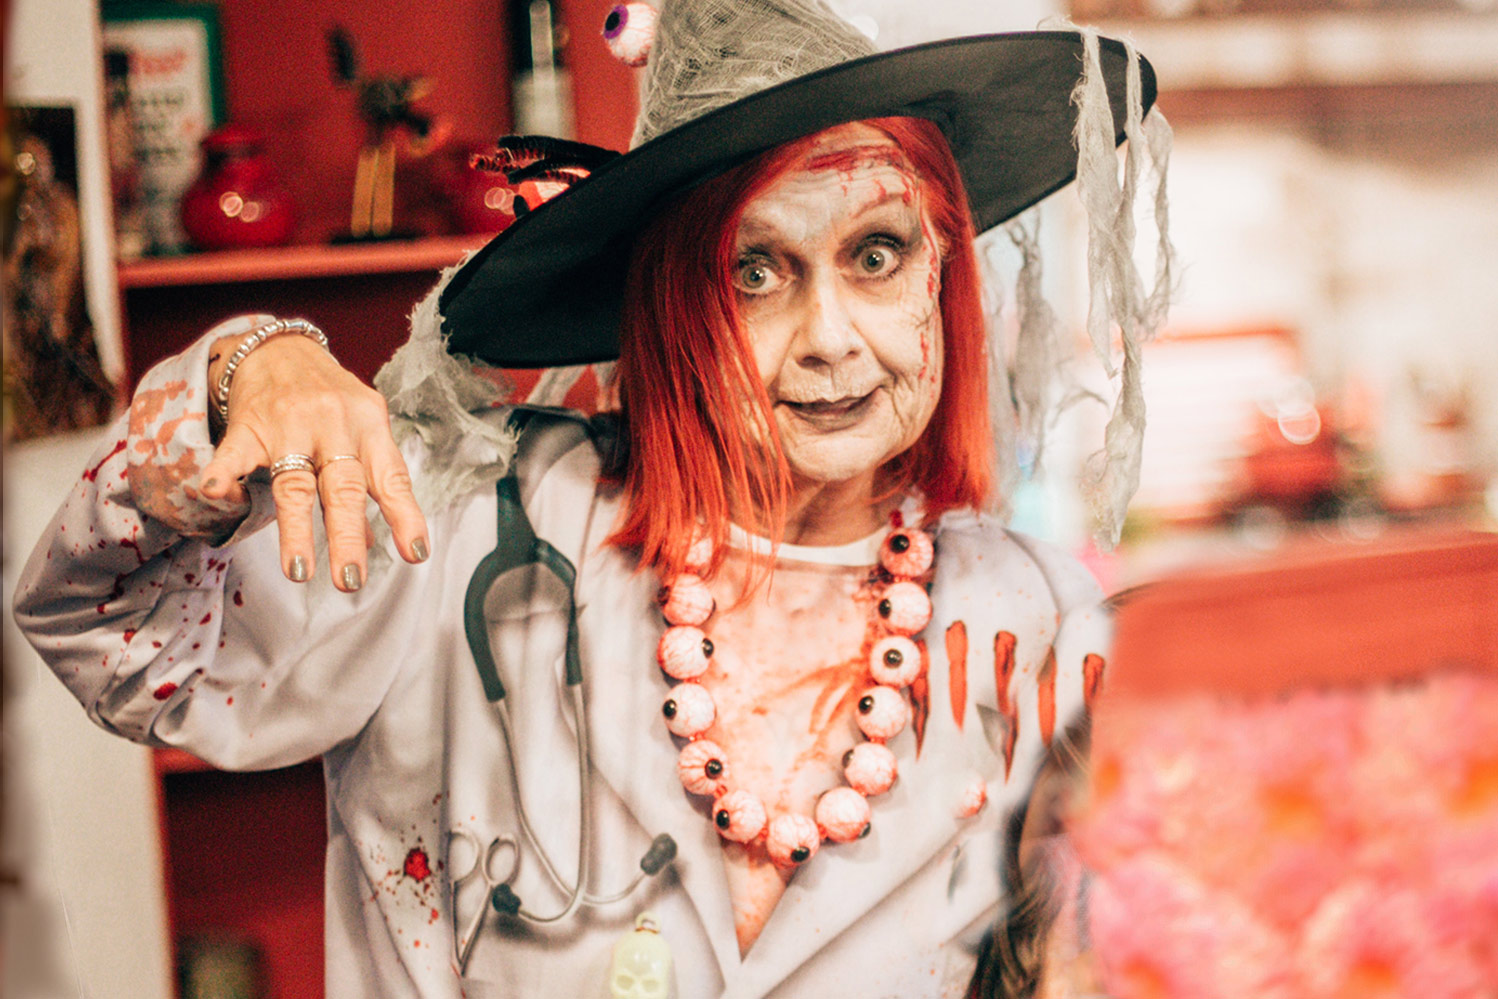 Older woman dressed up for Halloween standing in kitchen